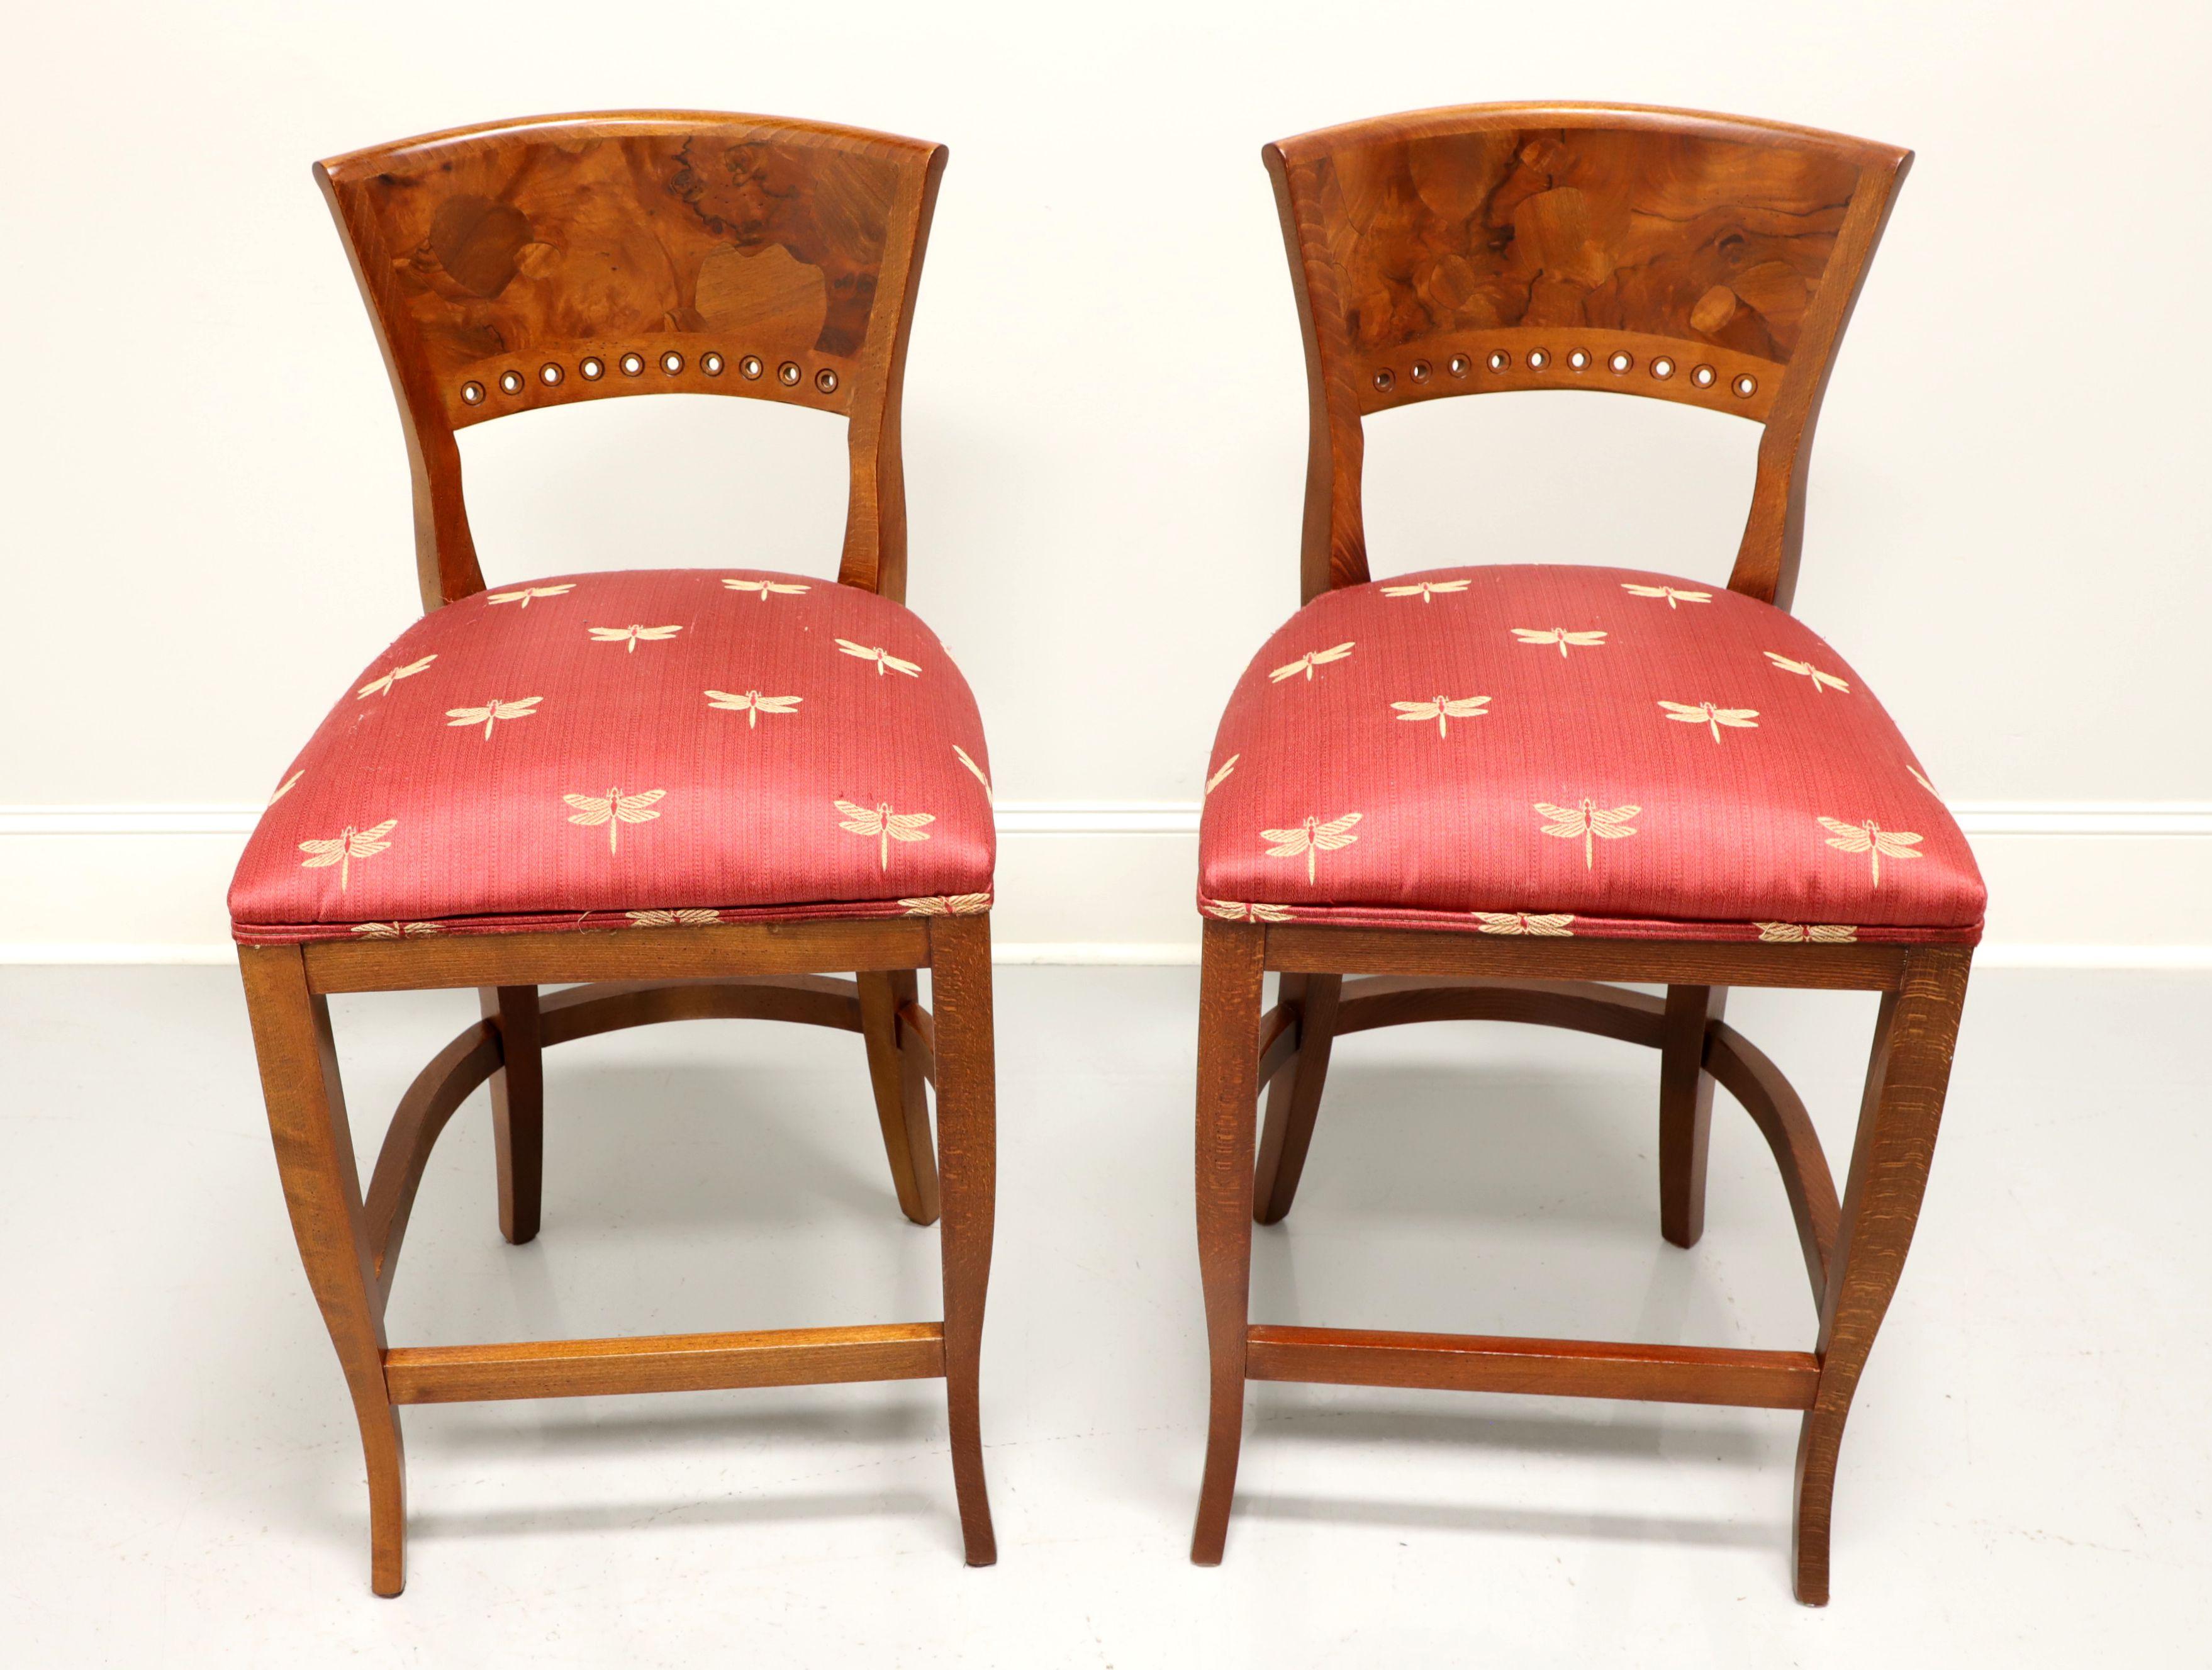 A pair of Neoclassical style counter height stools by Emerson et Cie, of High Point, North Carolina, USA. Tiger & burl oak backrests, salmon colored fabric with gold fireflys upholstered seats, saber legs with curved stretchers and footrest. Made in